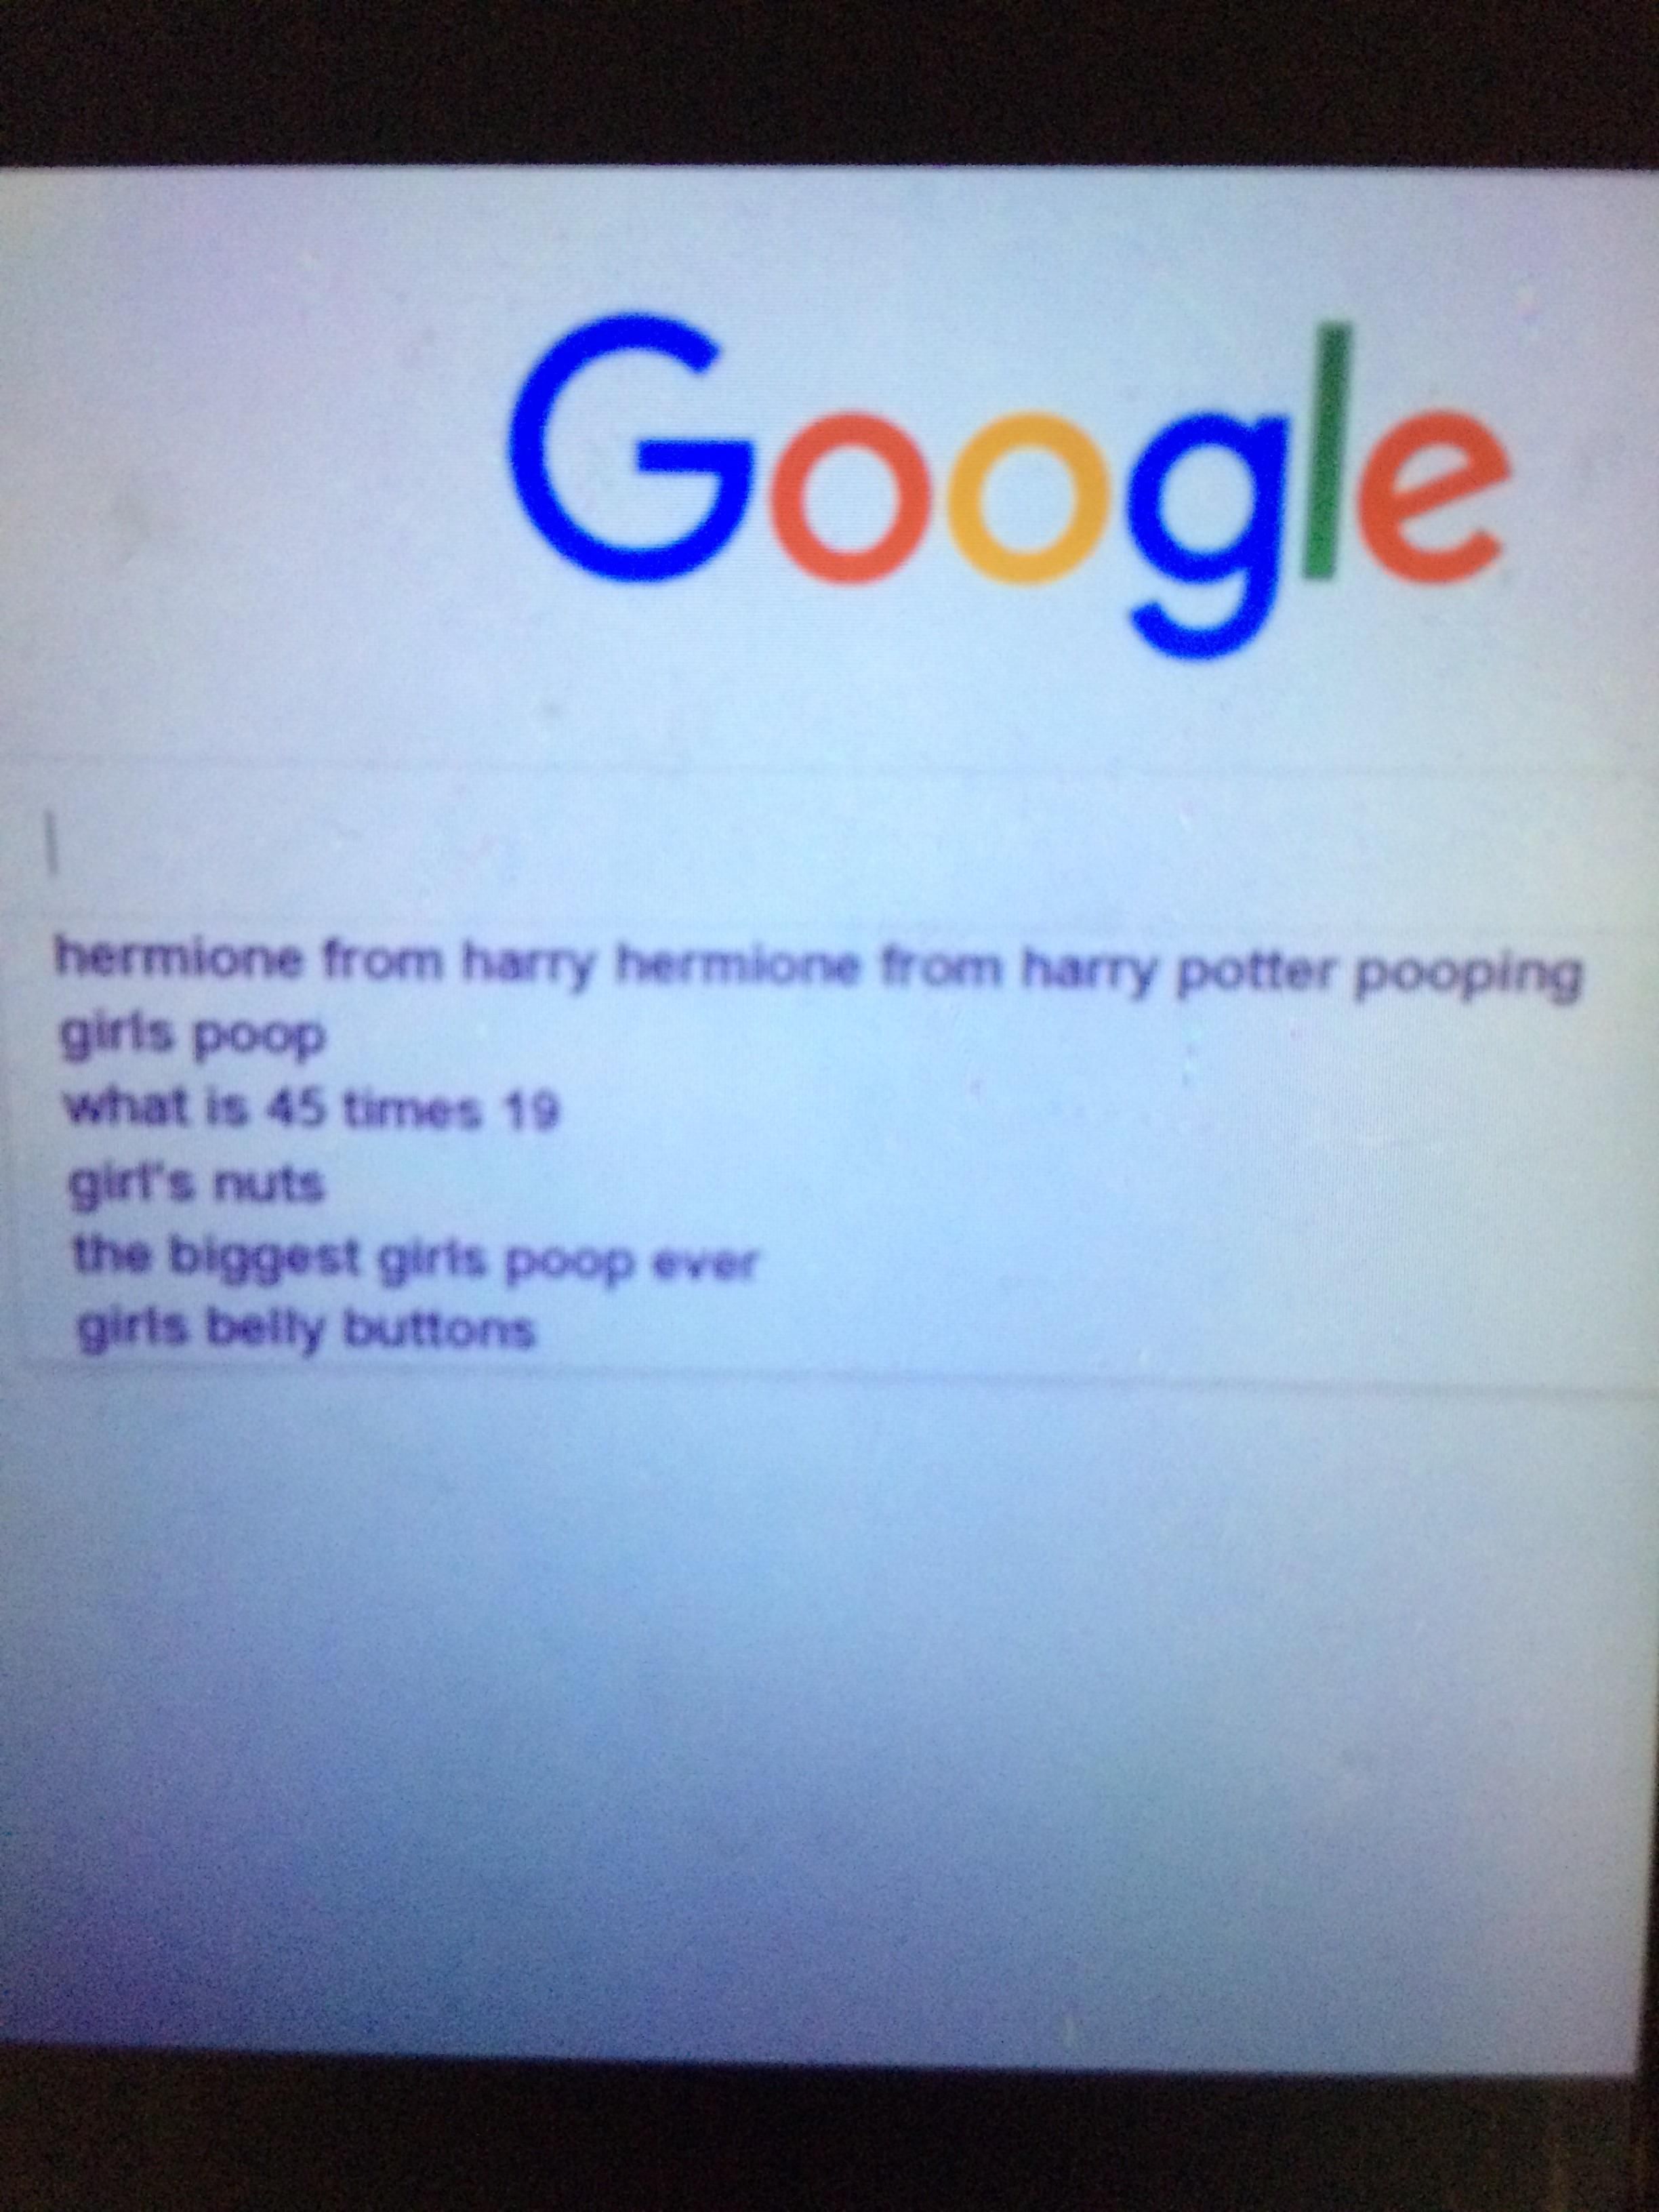 When little boys figure out the endless possibilities of asking Google.